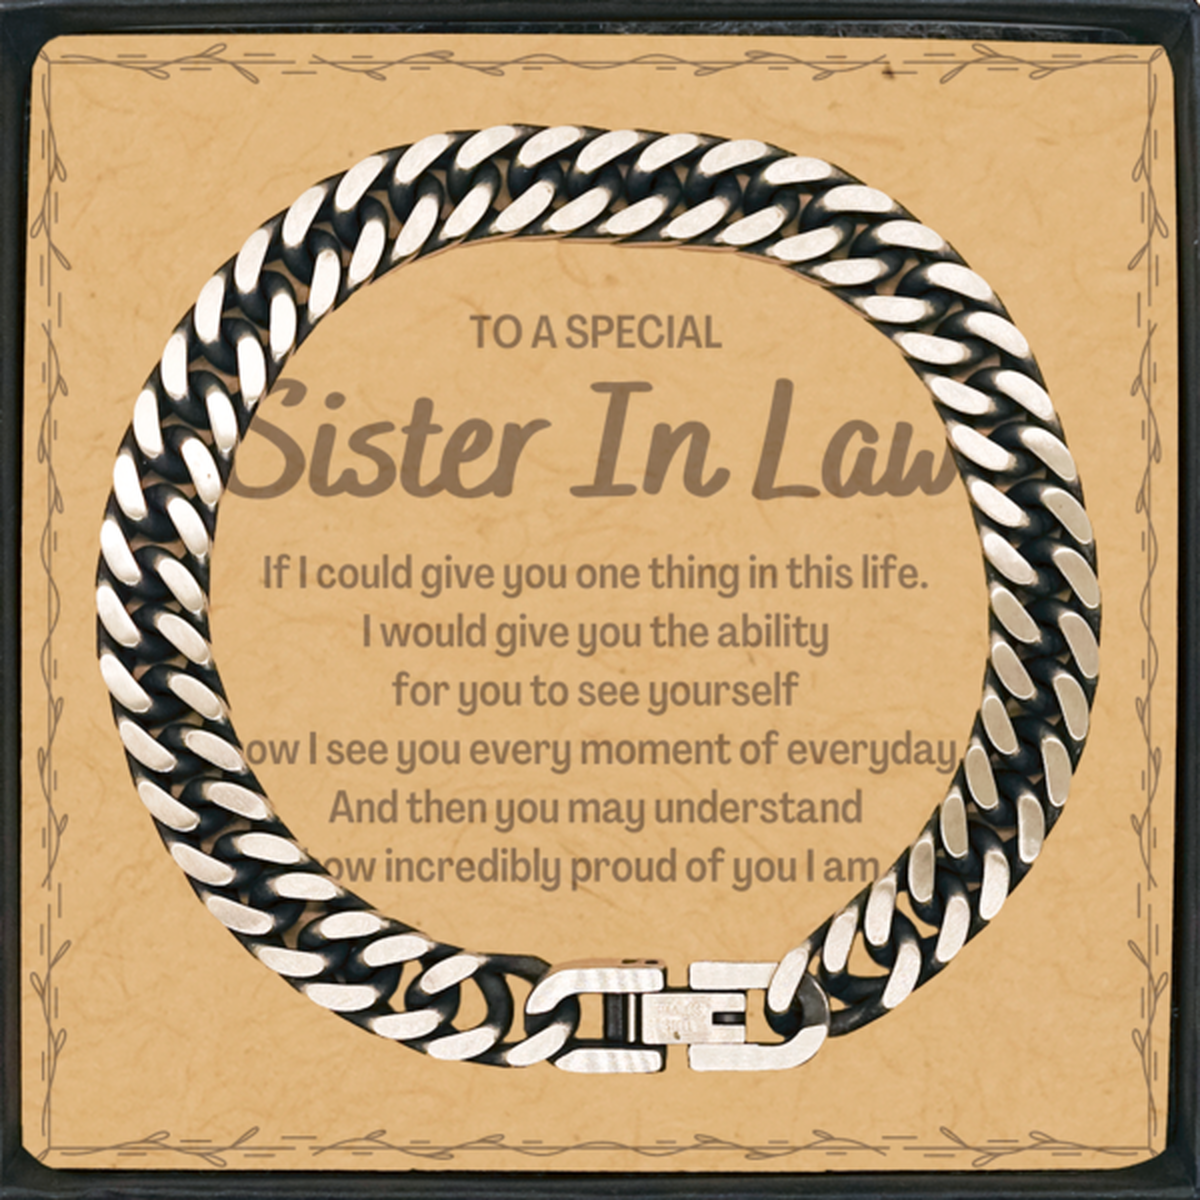 To My Sister In Law Cuban Link Chain Bracelet, Gifts For Sister In Law Message Card, Inspirational Gifts for Christmas Birthday, Epic Gifts for Sister In Law To A Special Sister In Law how incredibly proud of you I am